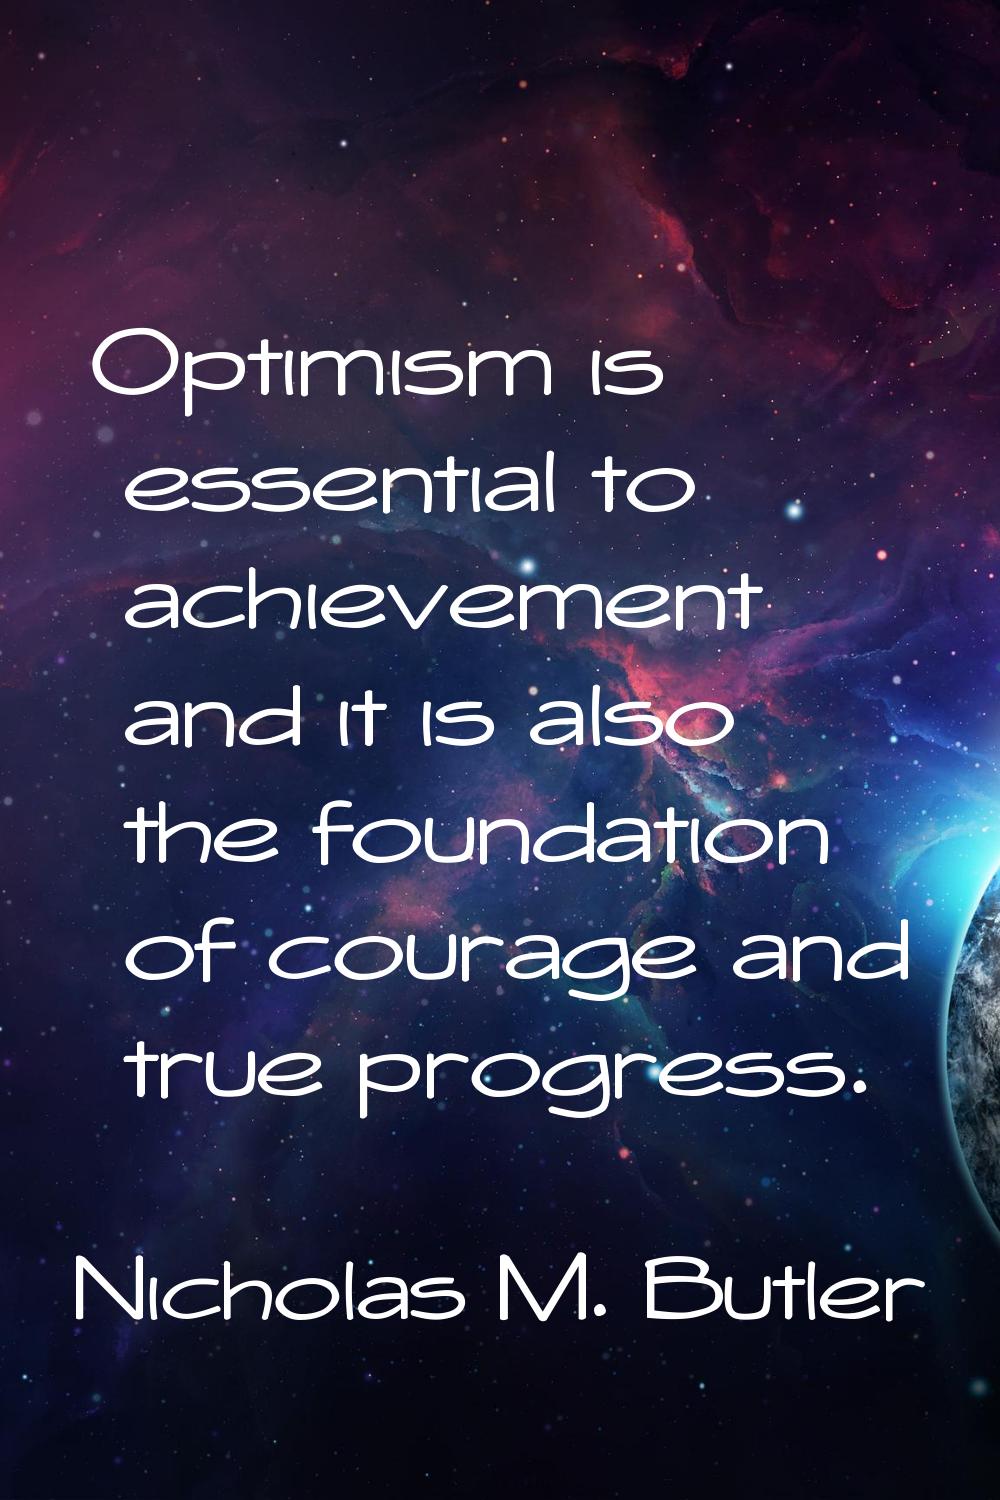 Optimism is essential to achievement and it is also the foundation of courage and true progress.